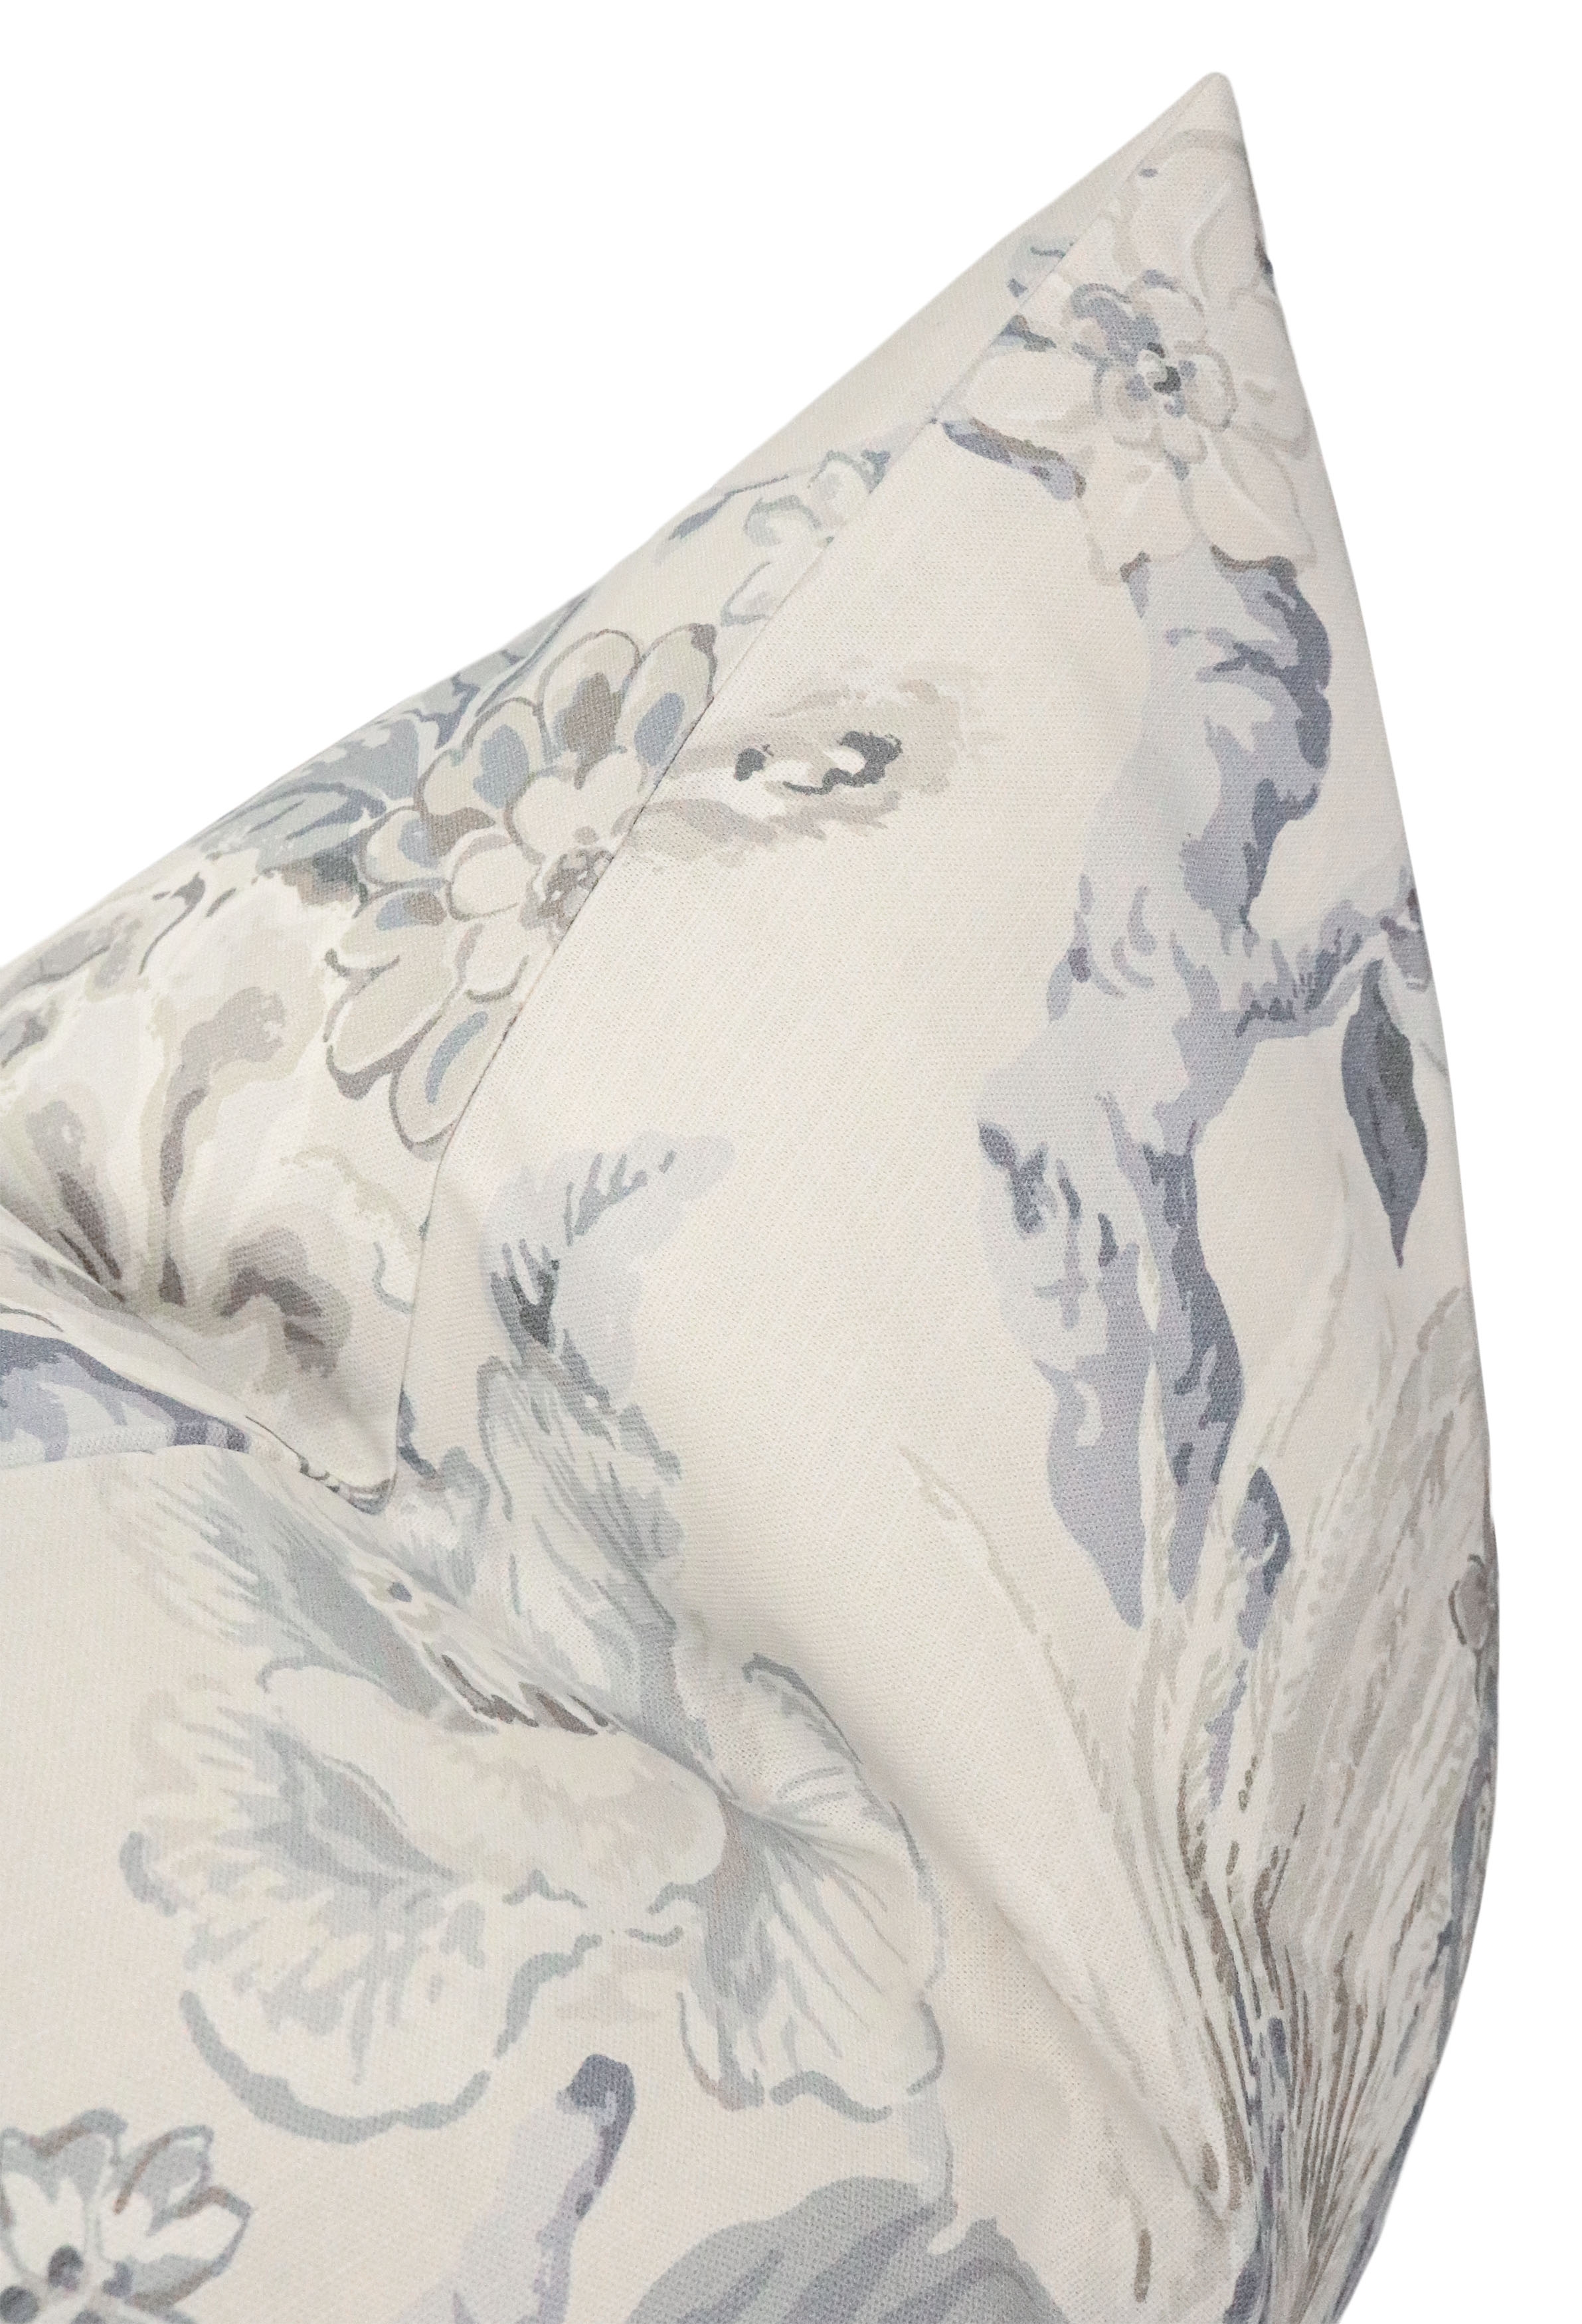 Floral Aviary Print Pillow Cover, Delft, 20" x 20" - Image 2